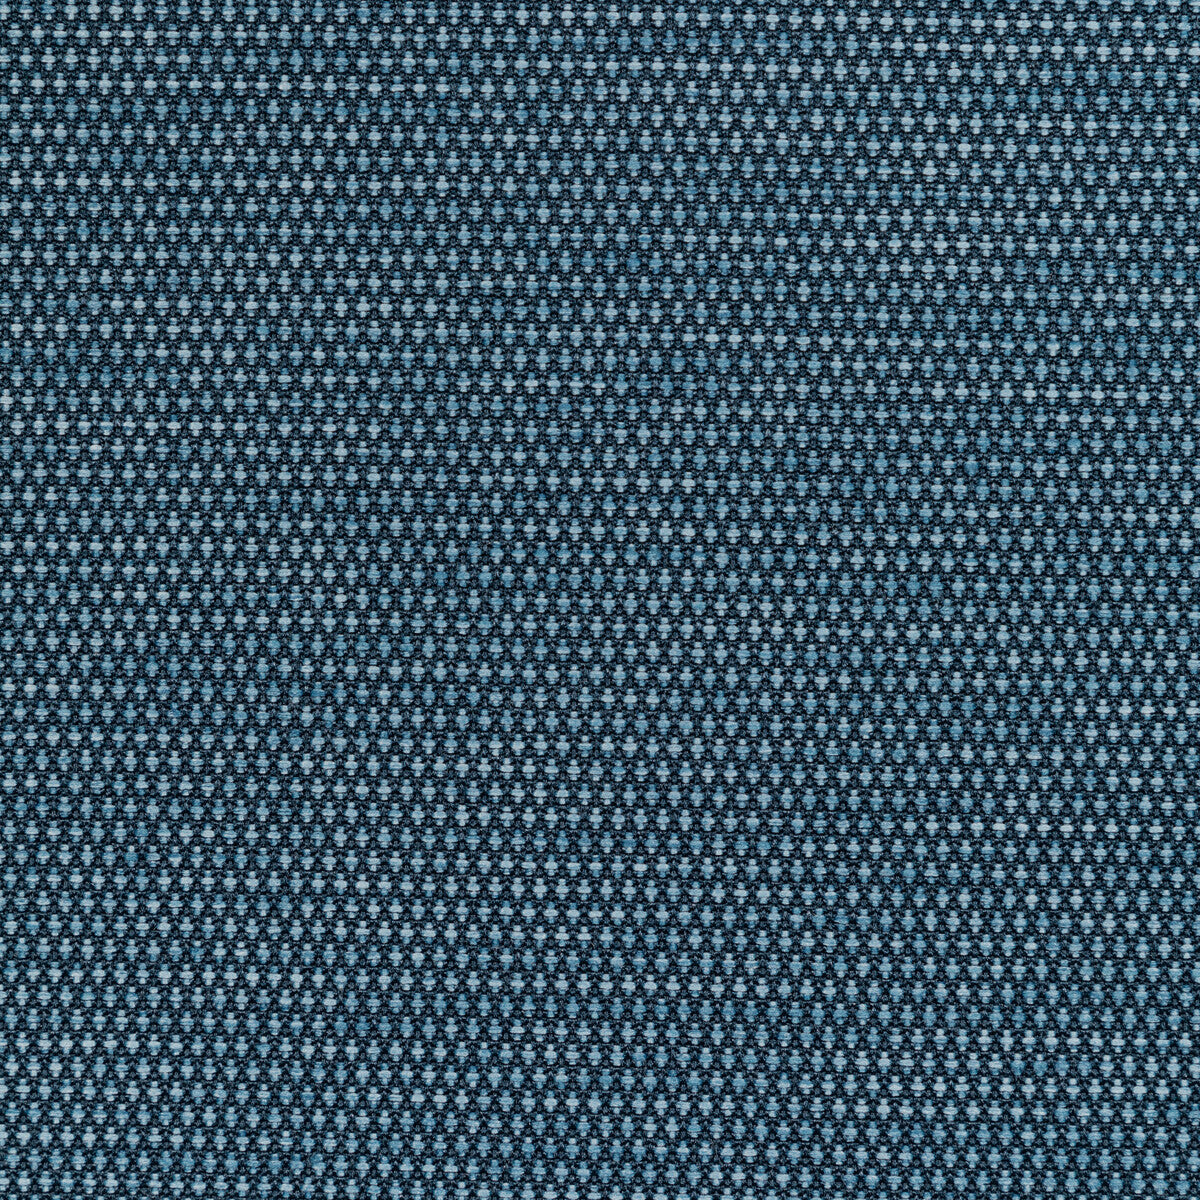 Mobilize fabric in bimini color - pattern 36256.5.0 - by Kravet Contract in the Supreen collection